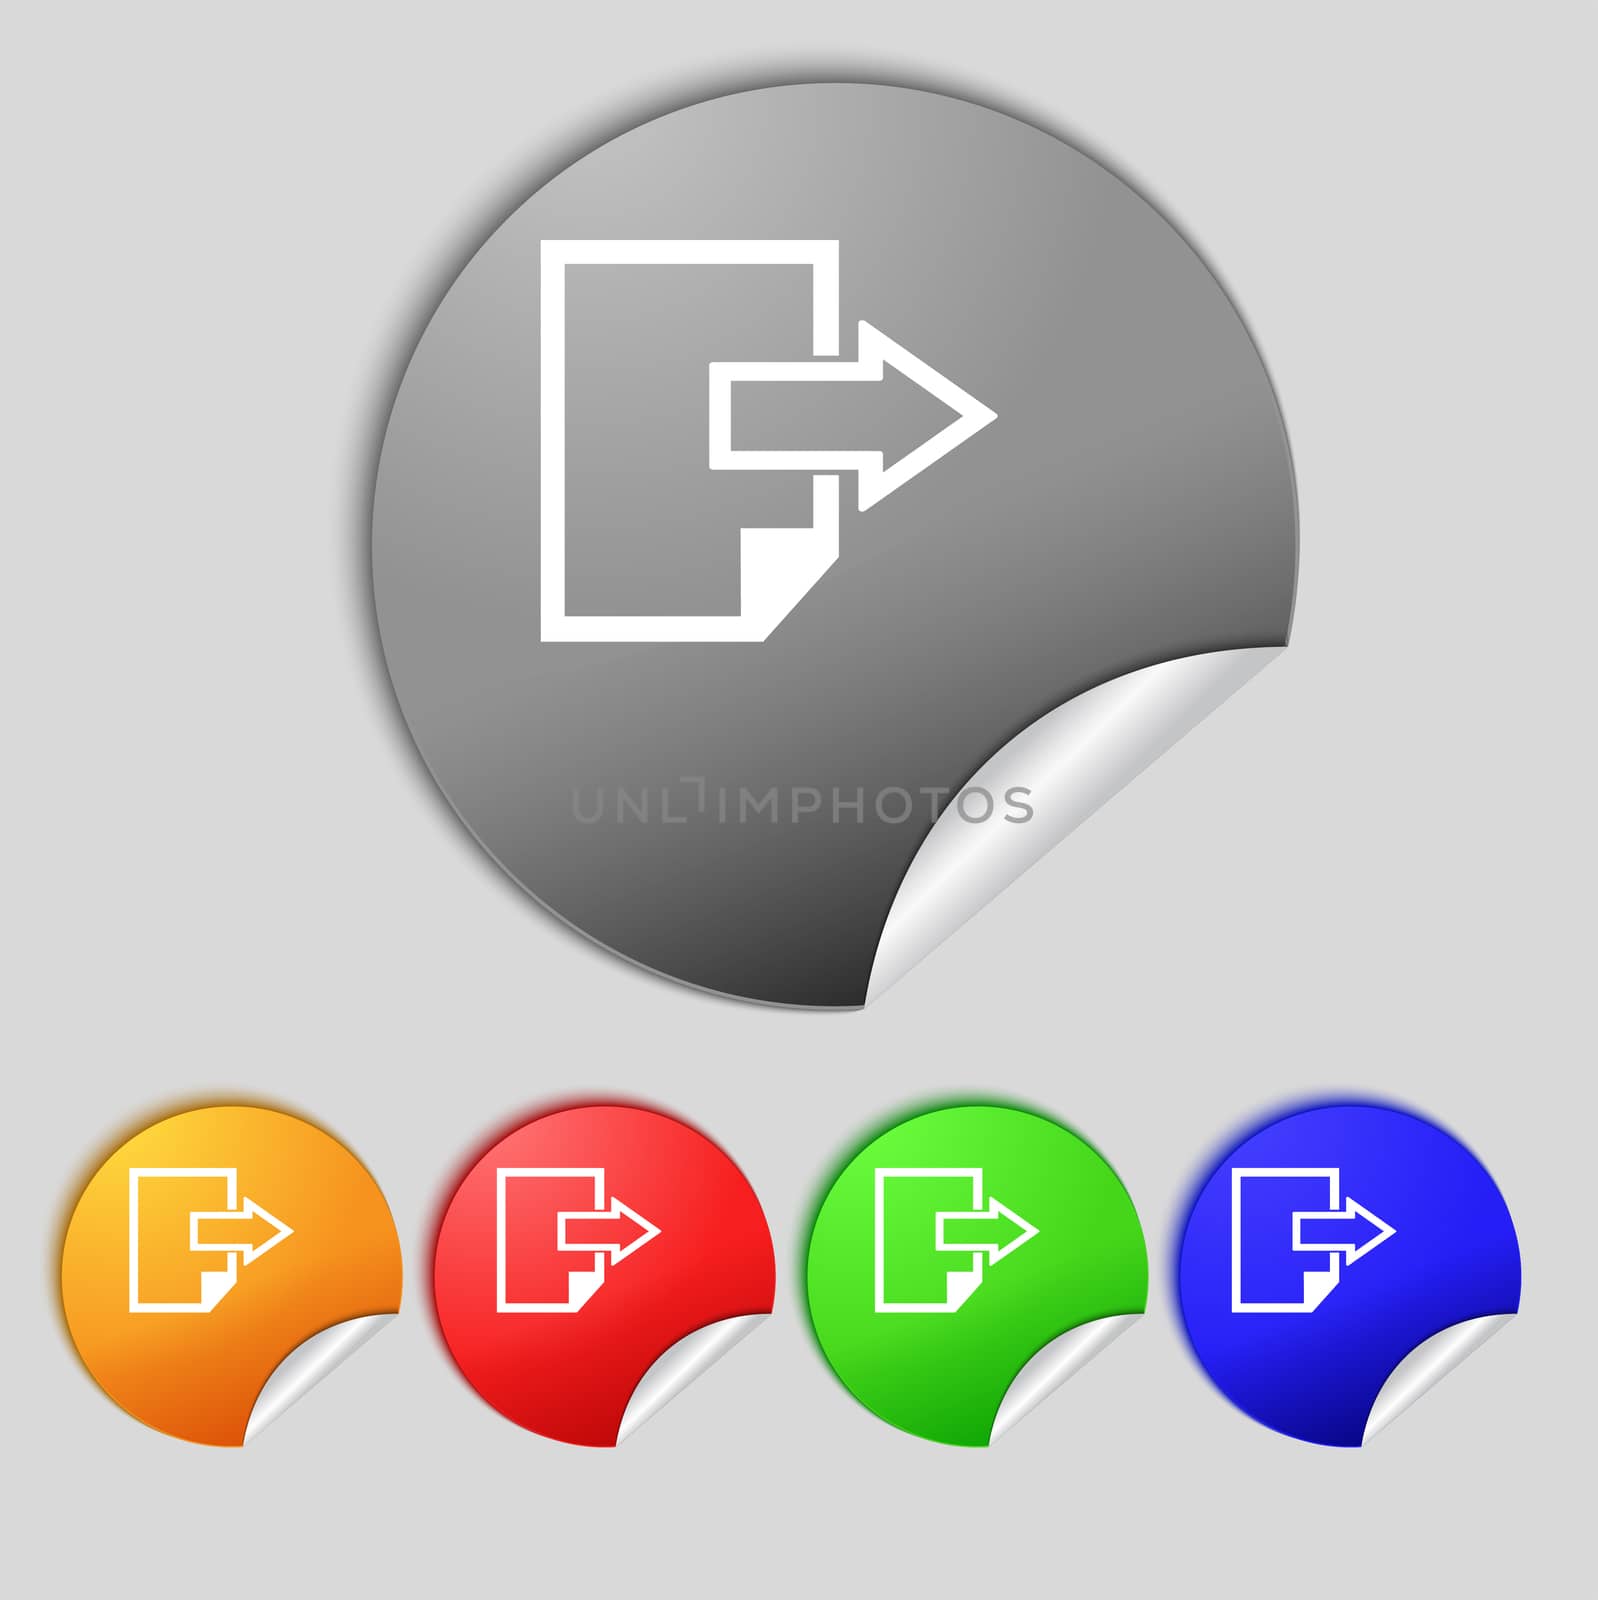 Export file icon. File document symbol. Set of colored buttons.  by serhii_lohvyniuk